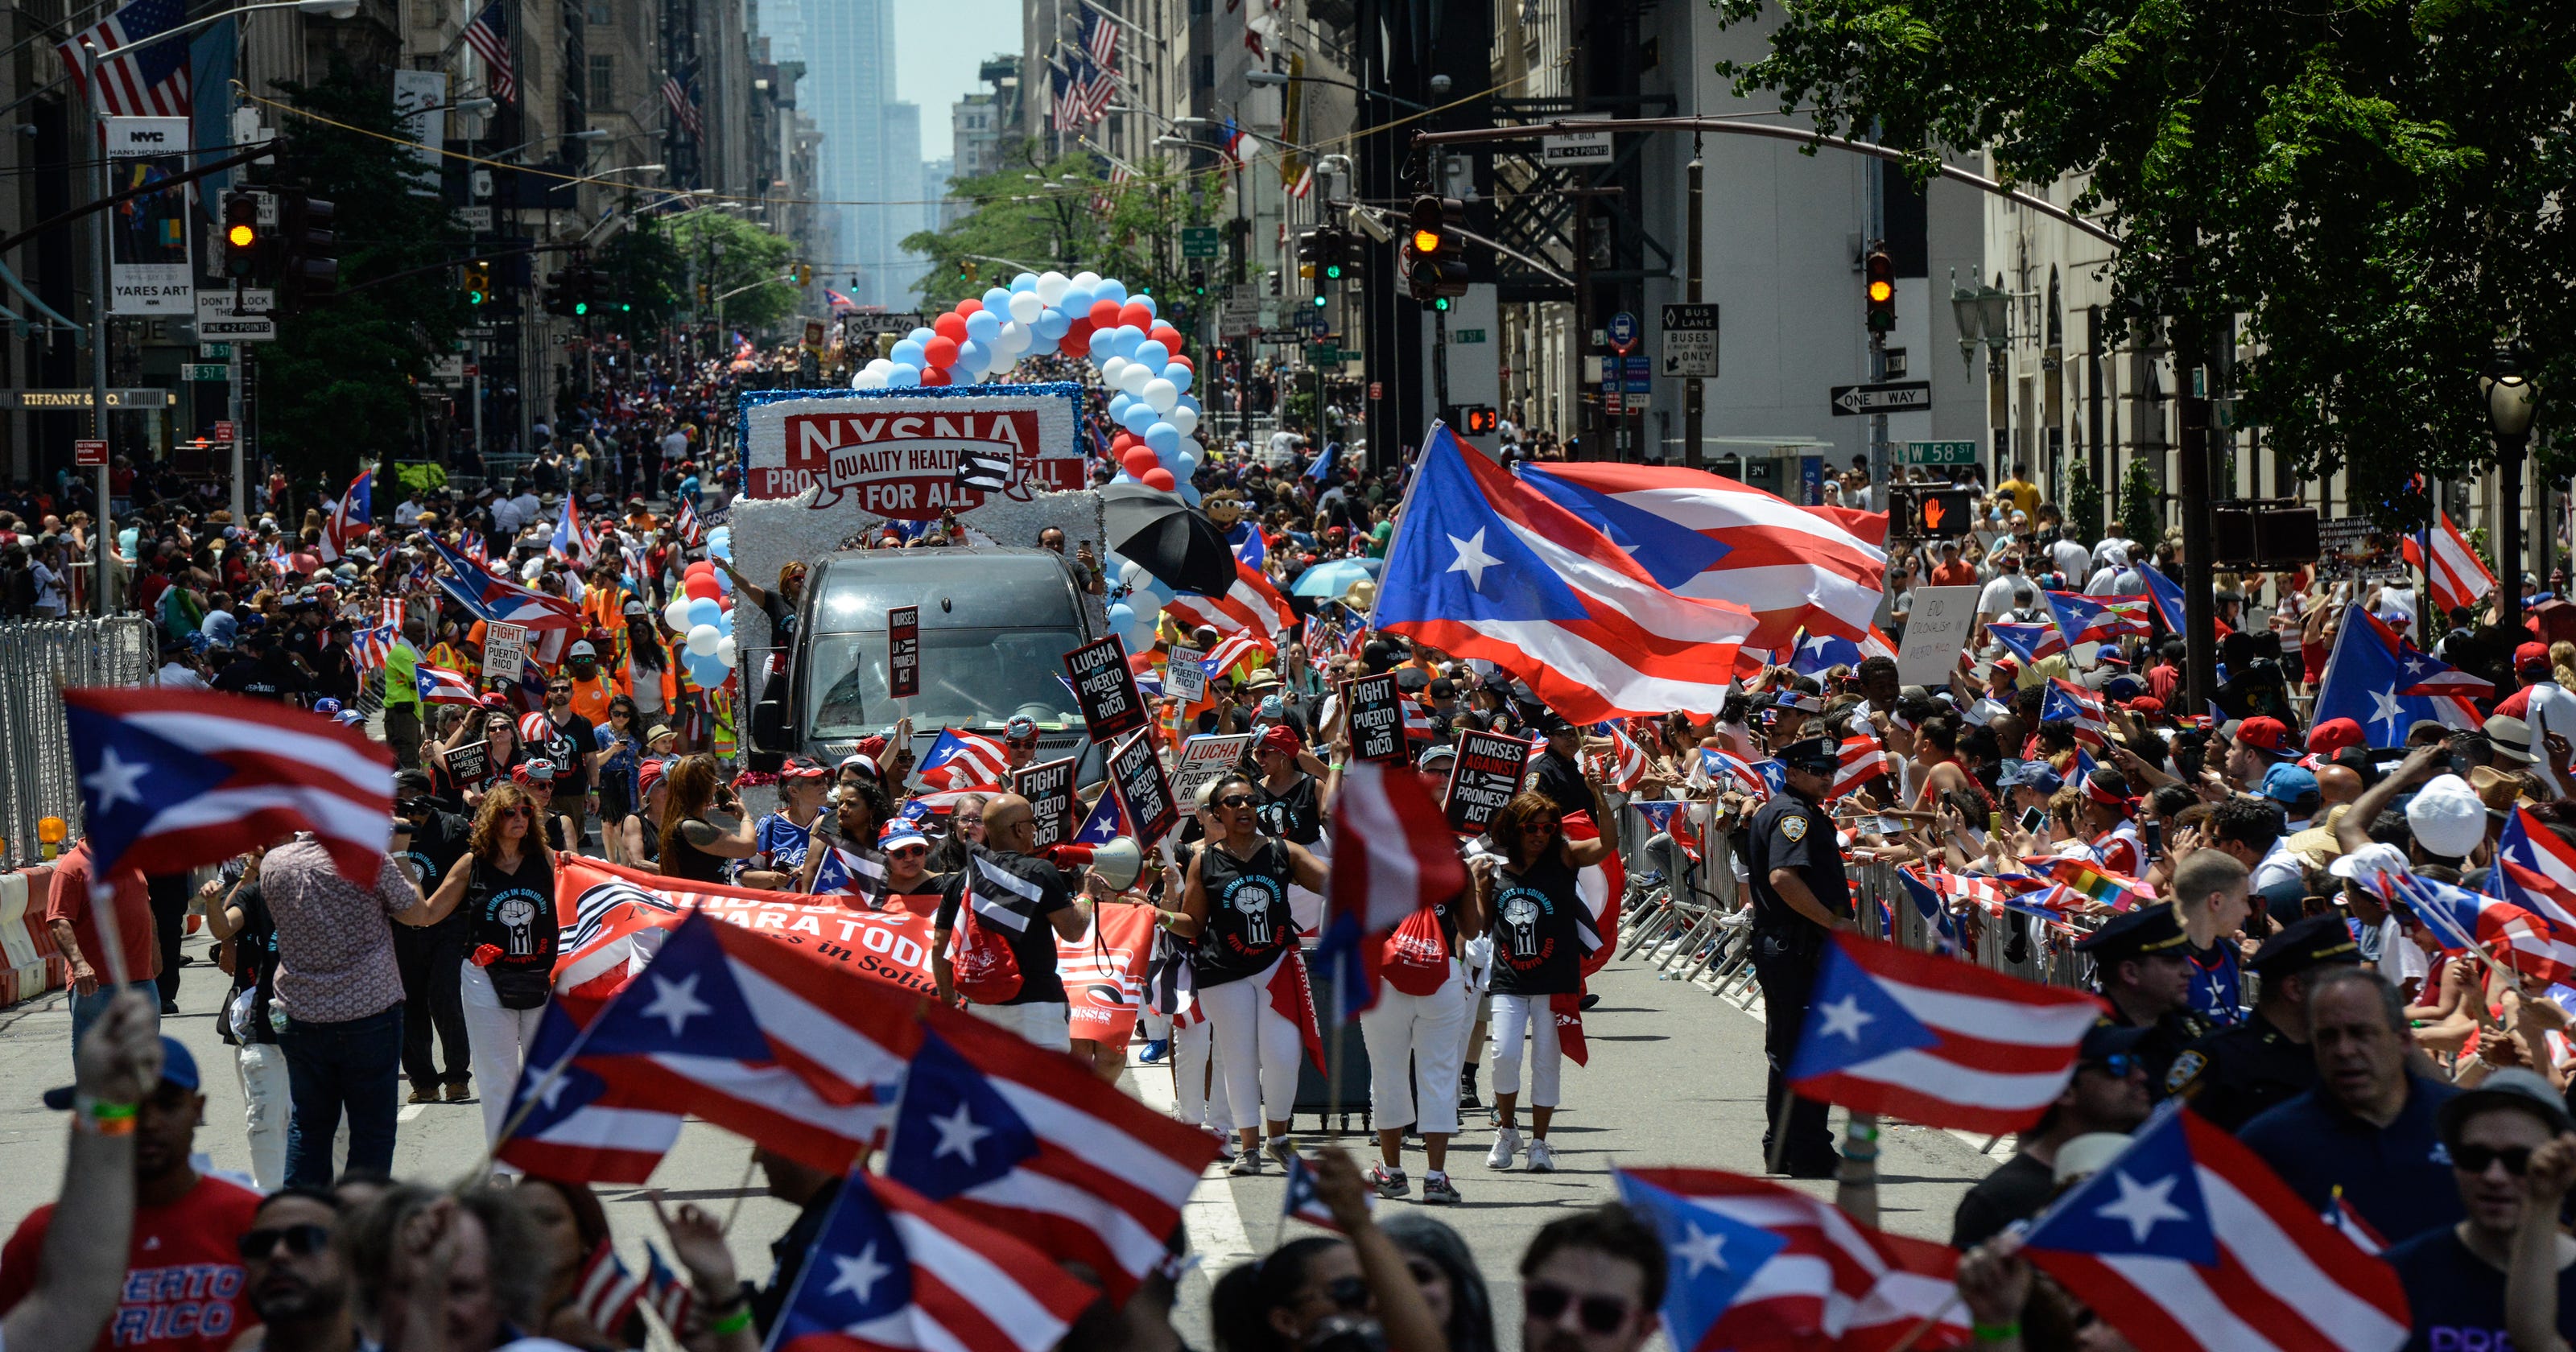 Puerto Ricans parade in New York, back statehood